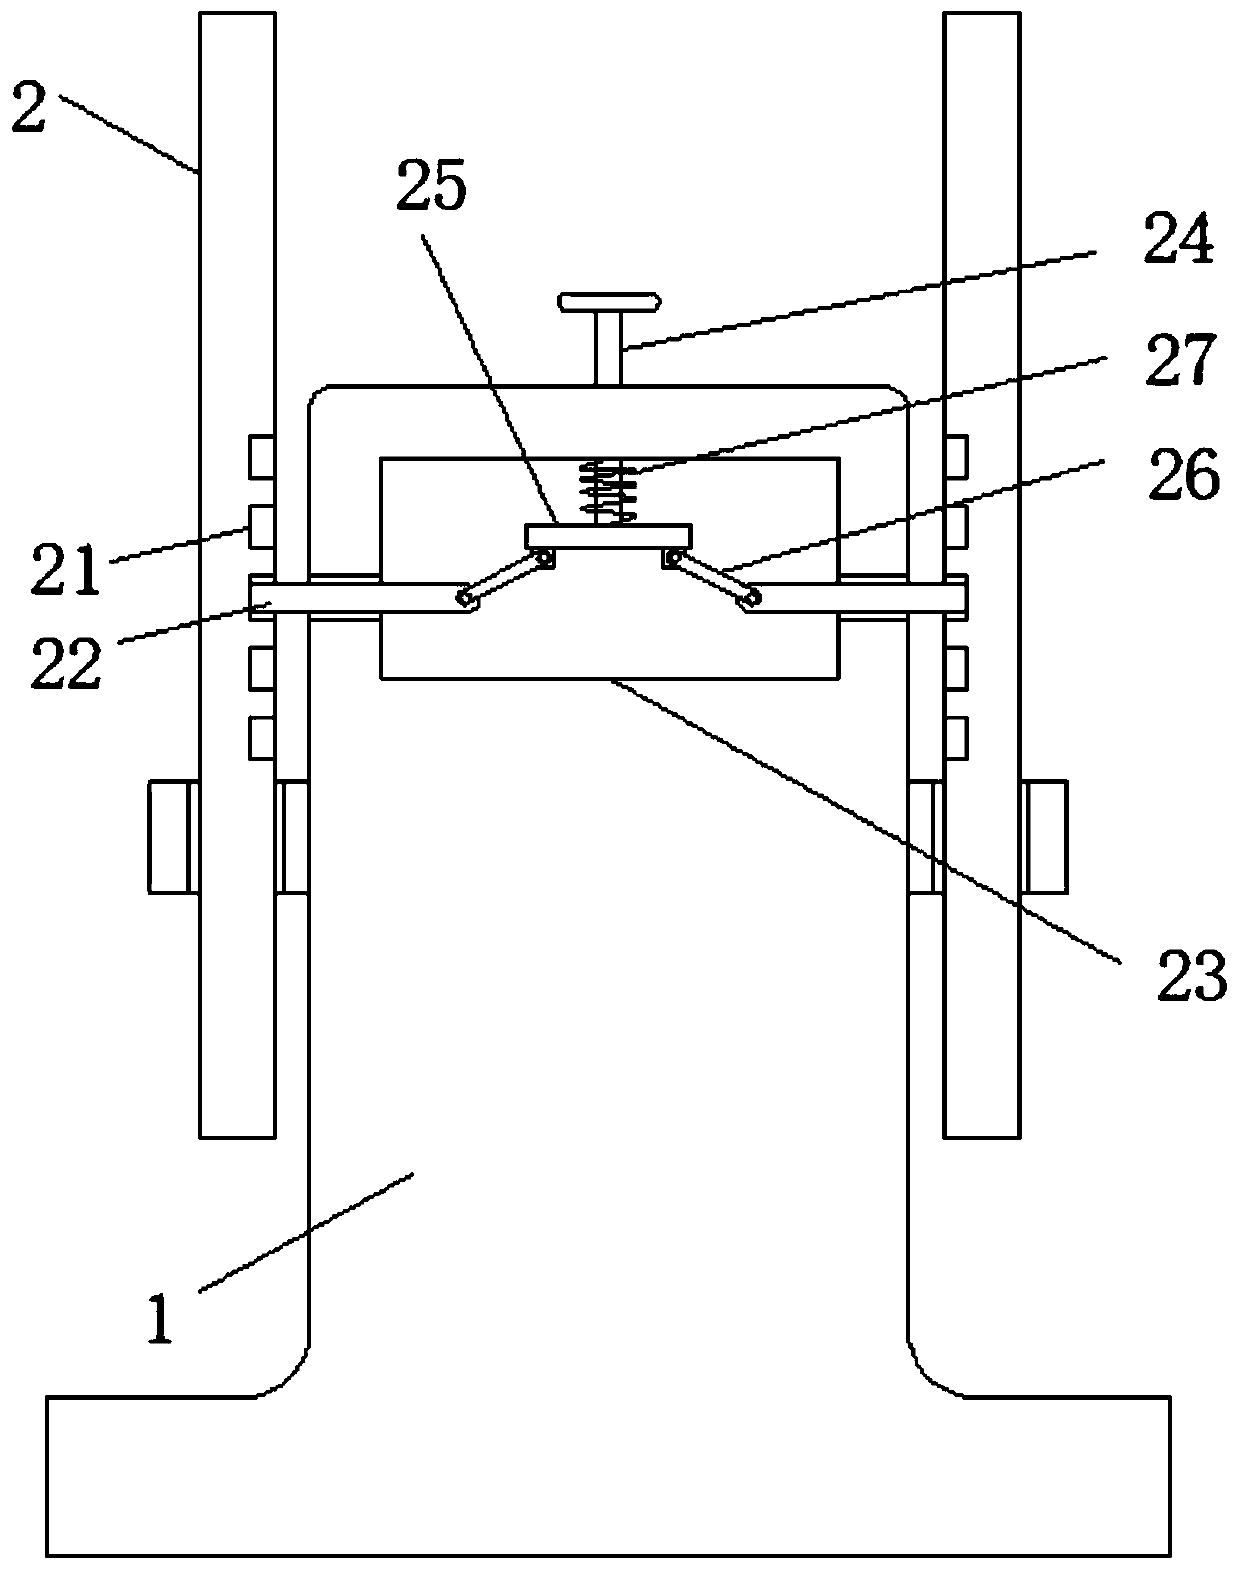 Auxiliary supporting device for ophthalmic surgery